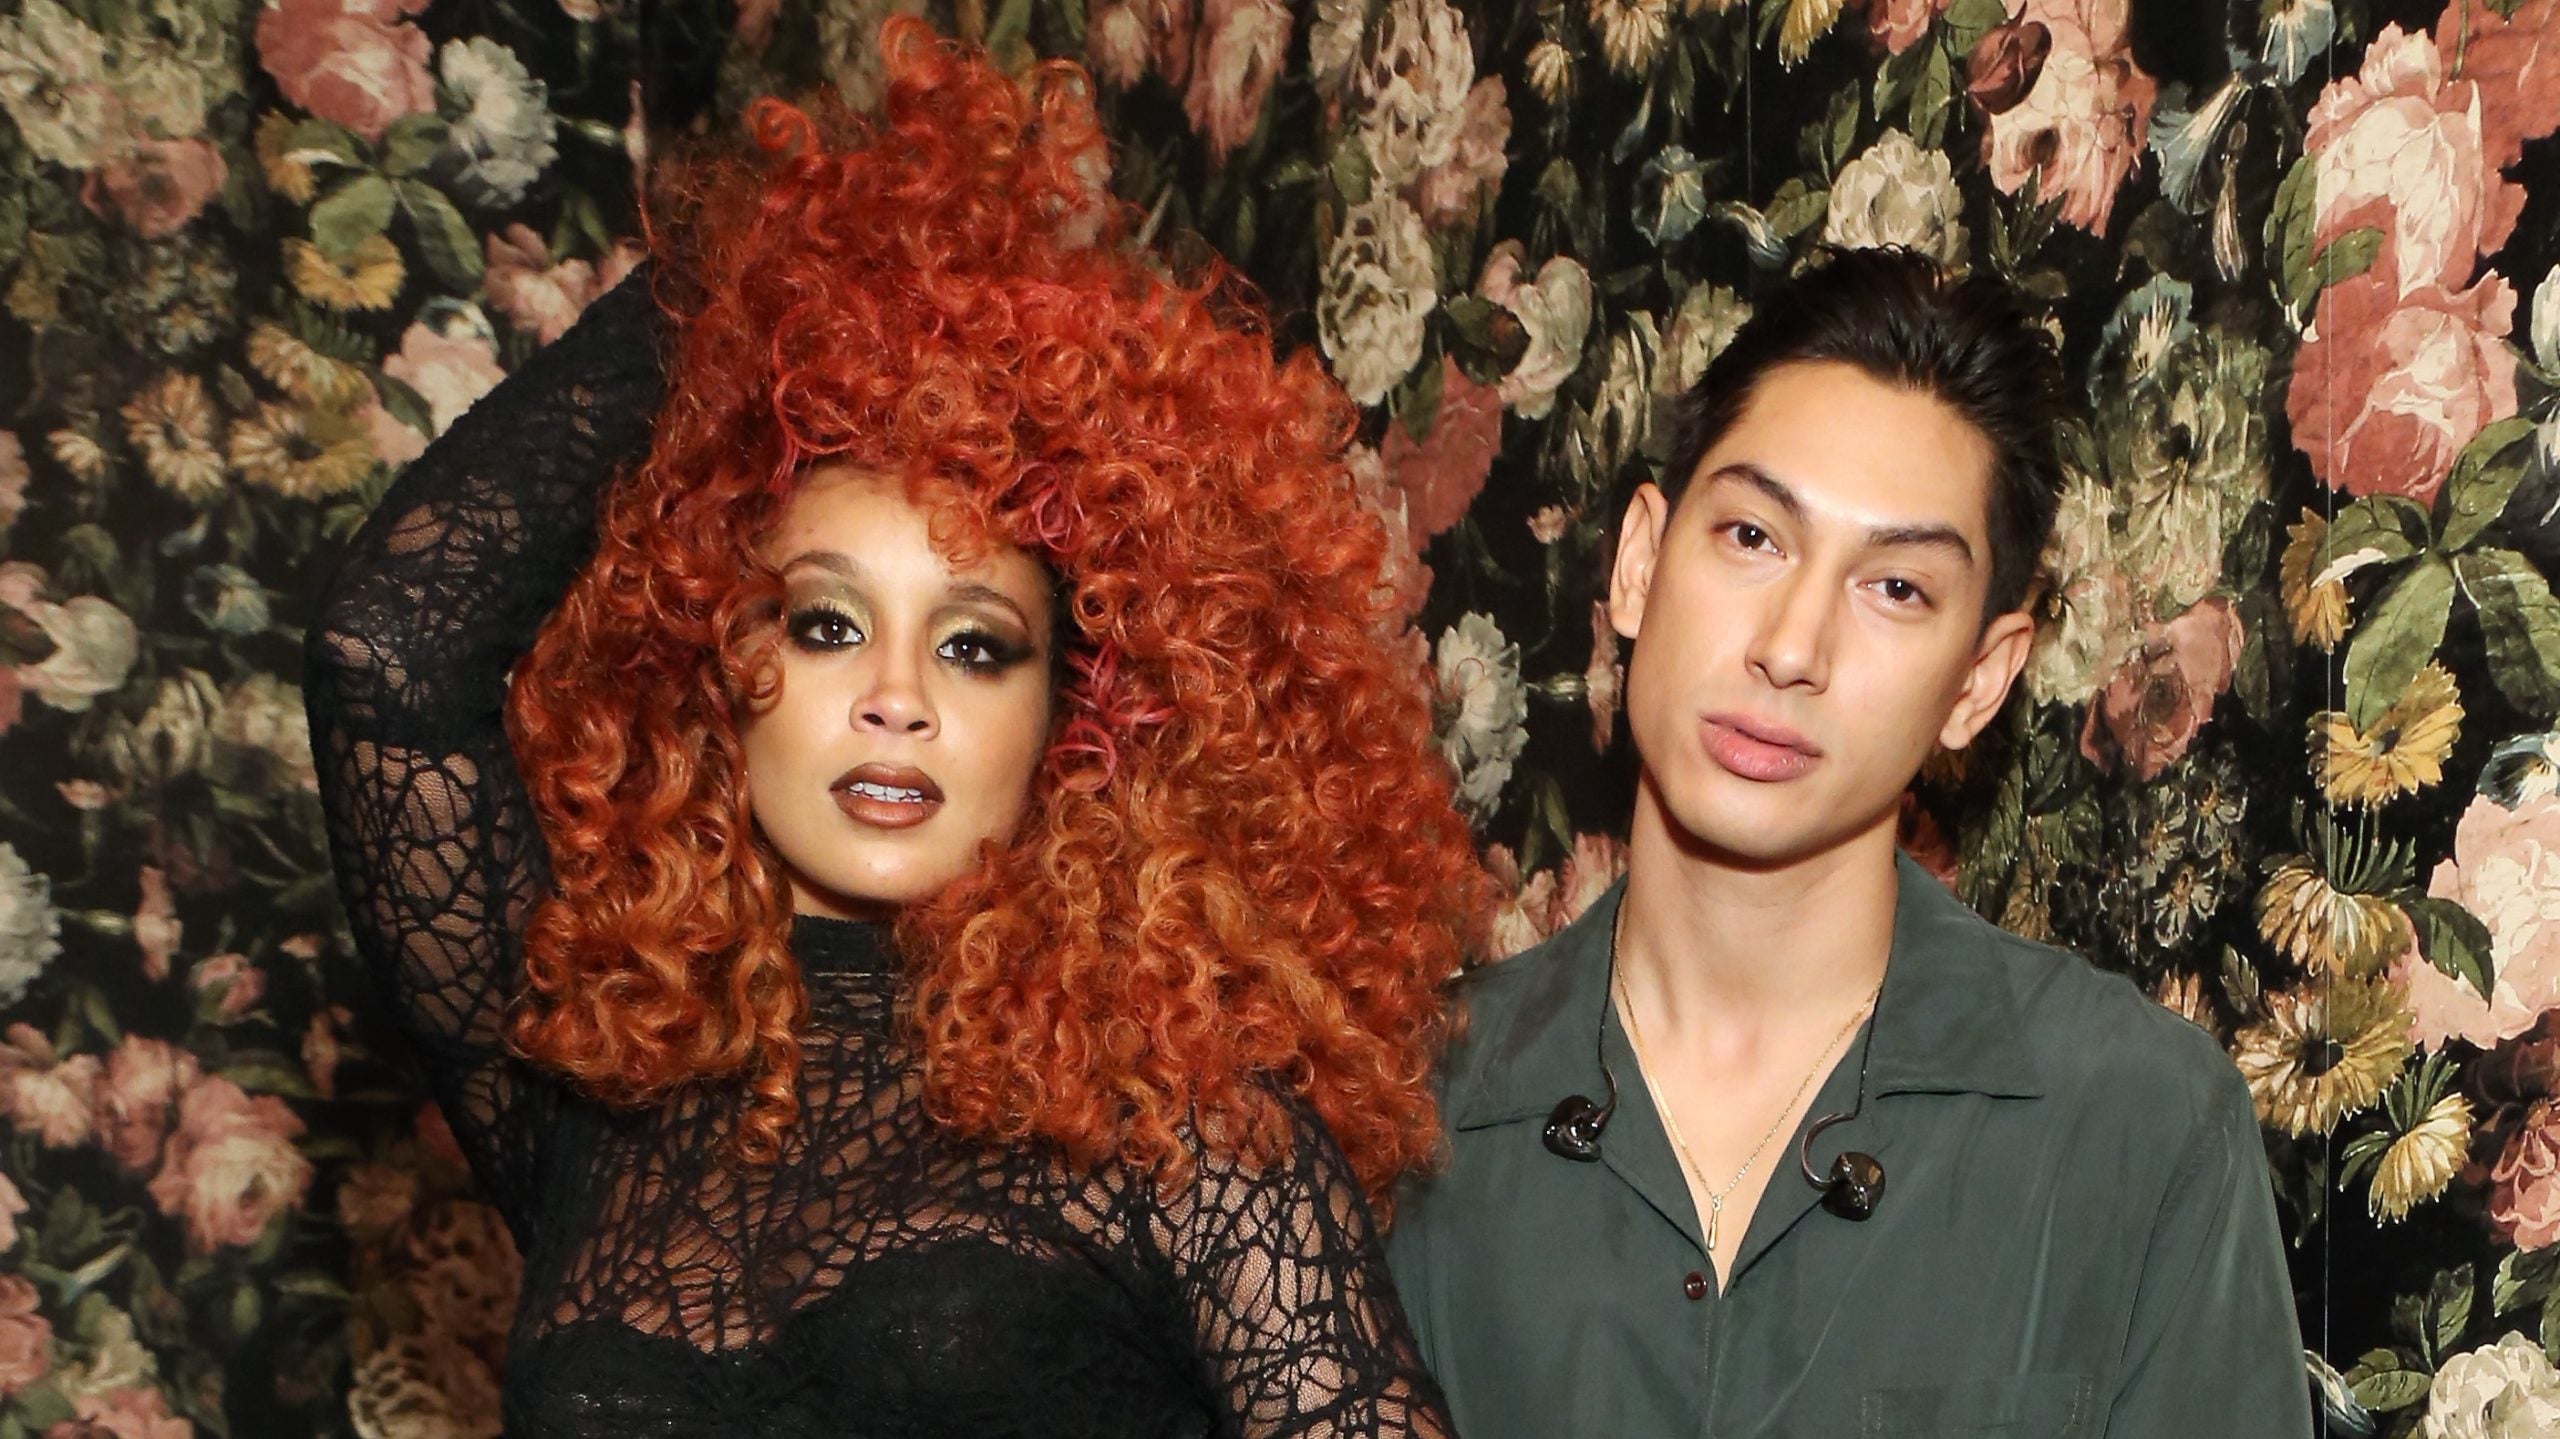 Exclusive: LION BABE Singer Jillian Hervey Welcomes First Child